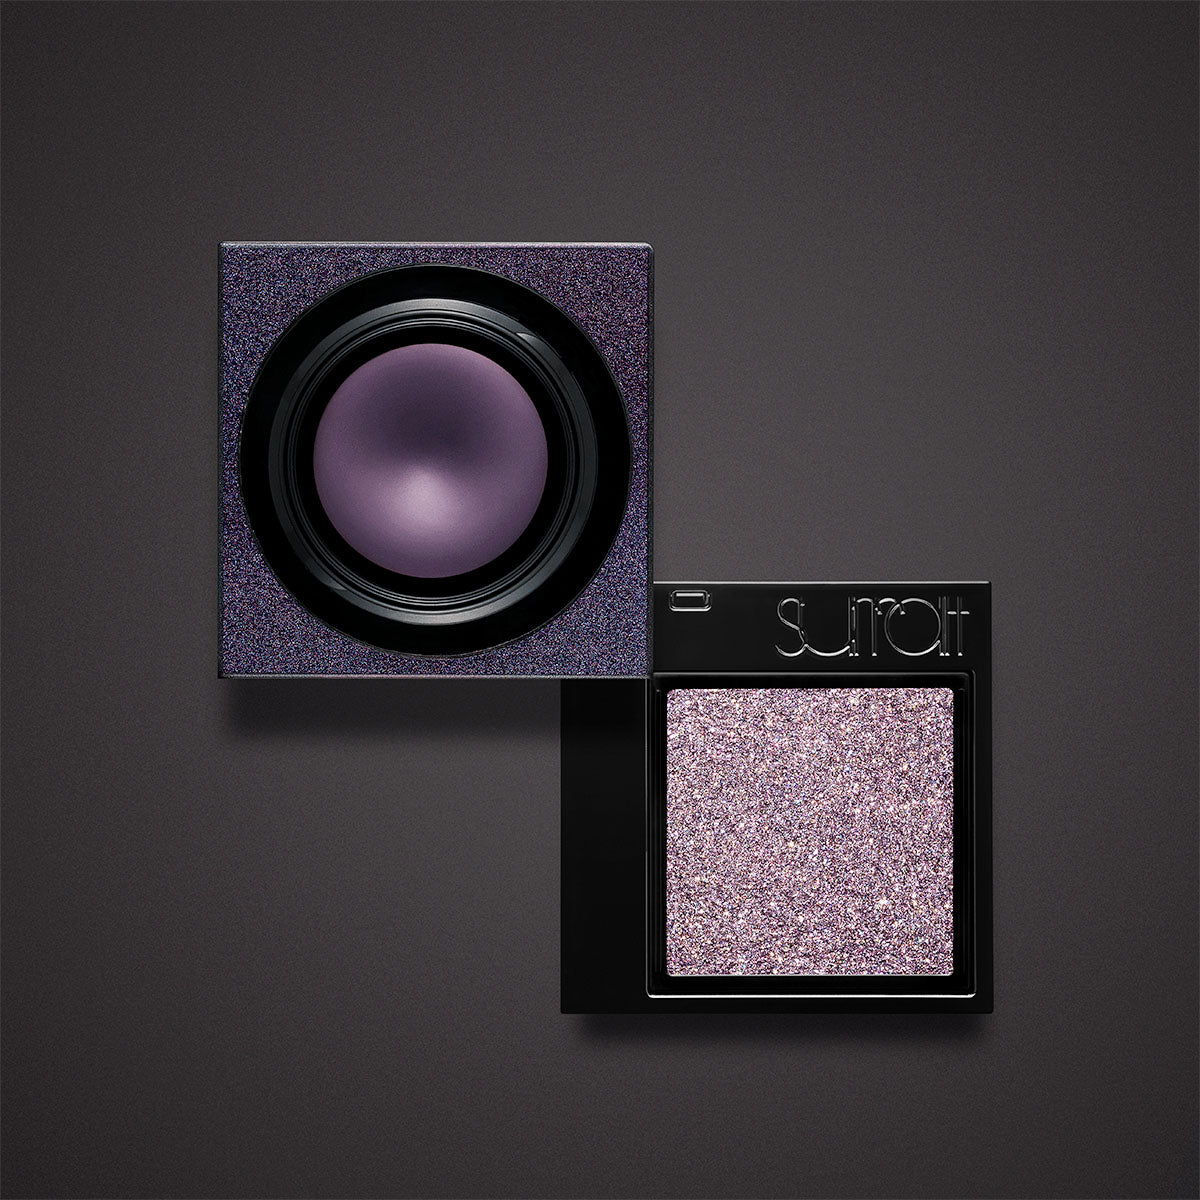 GLAMOUR EYES - ROYAL PLUM CREAM WITH BRILLIANT BLUE-VIOLET SHADOW - Water-resistant, matte cream shadow in royal plum with blue-violet duochrome powder